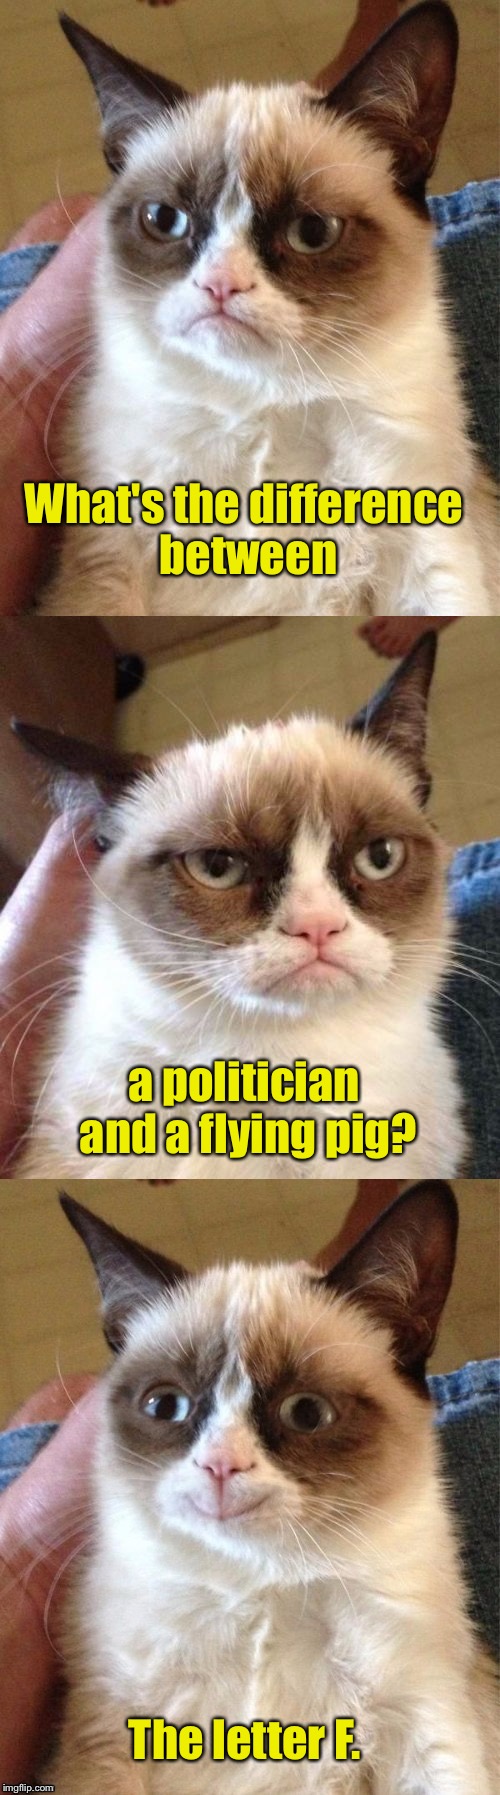 Political Pun Makes Even Grumpy Cat Smile | What's the difference between; a politician and a flying pig? The letter F. | image tagged in bad pun grumpy cat,memes,political meme,bad pun | made w/ Imgflip meme maker